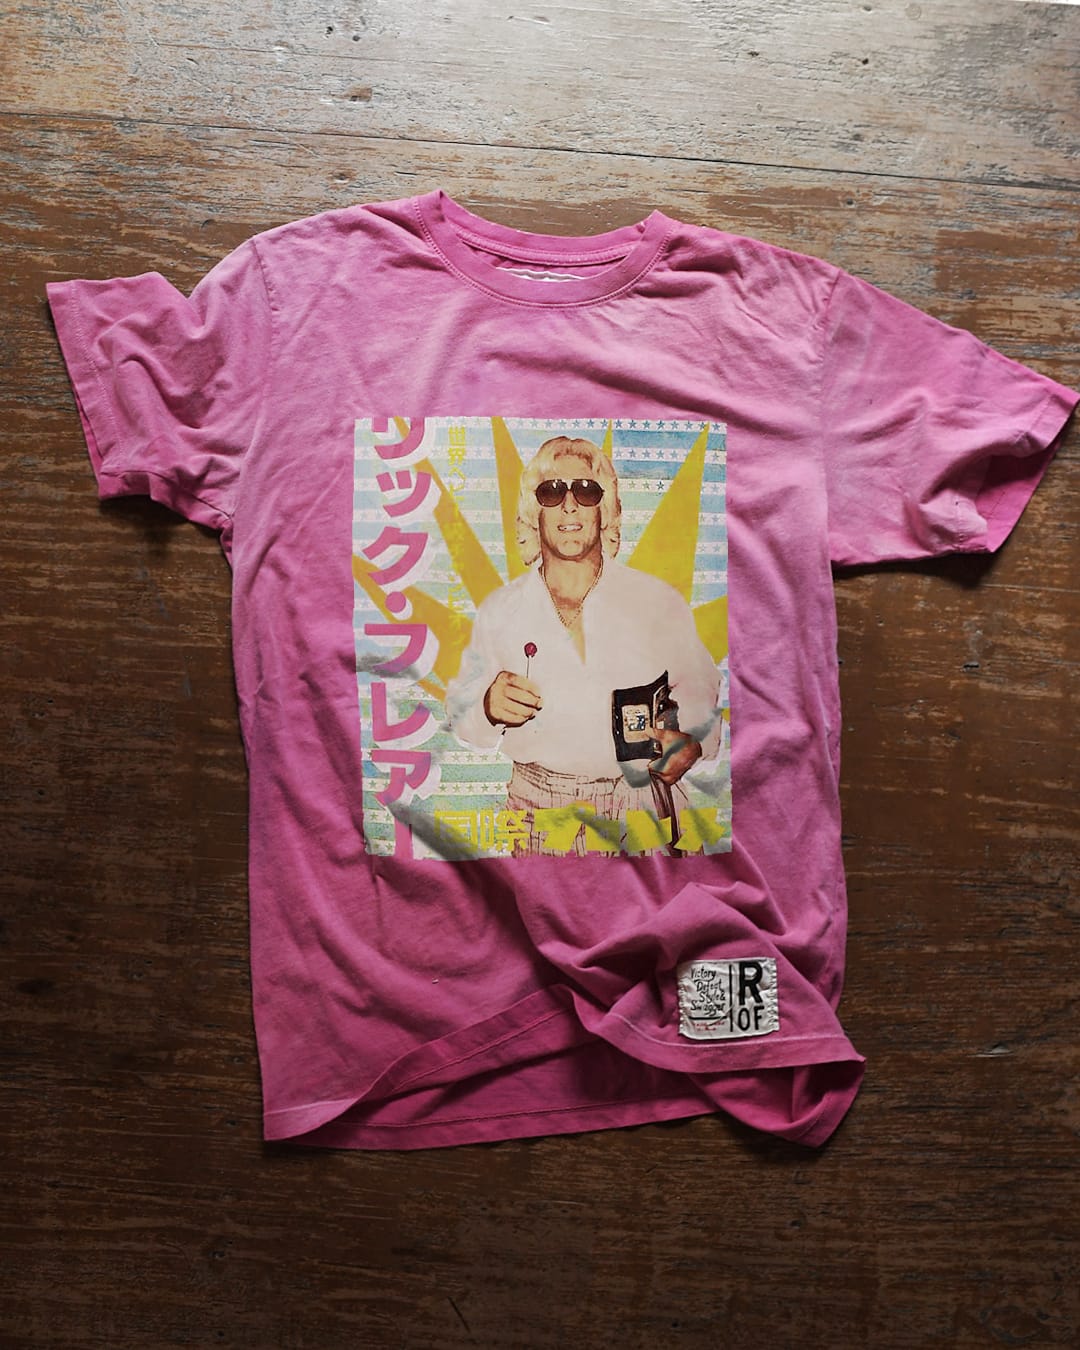 Ric Flair Photo Tee - Roots of Fight